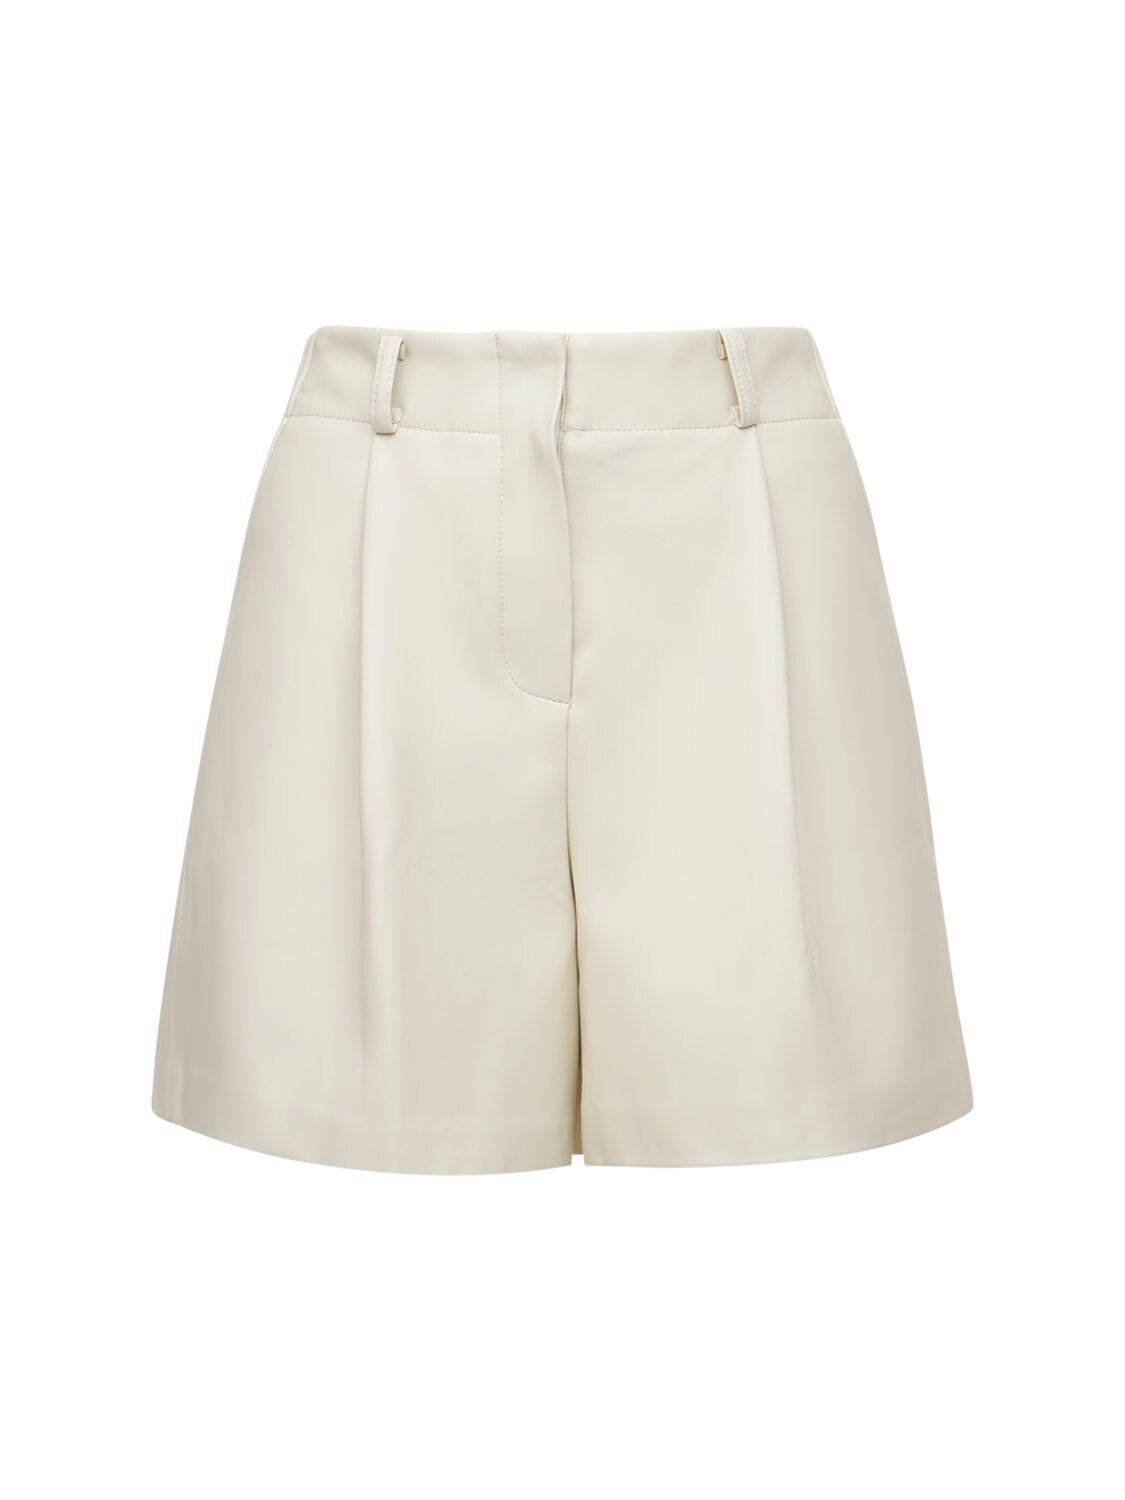 The Frankie Shop - Manon pleated faux leather shorts - | Luisaviaroma